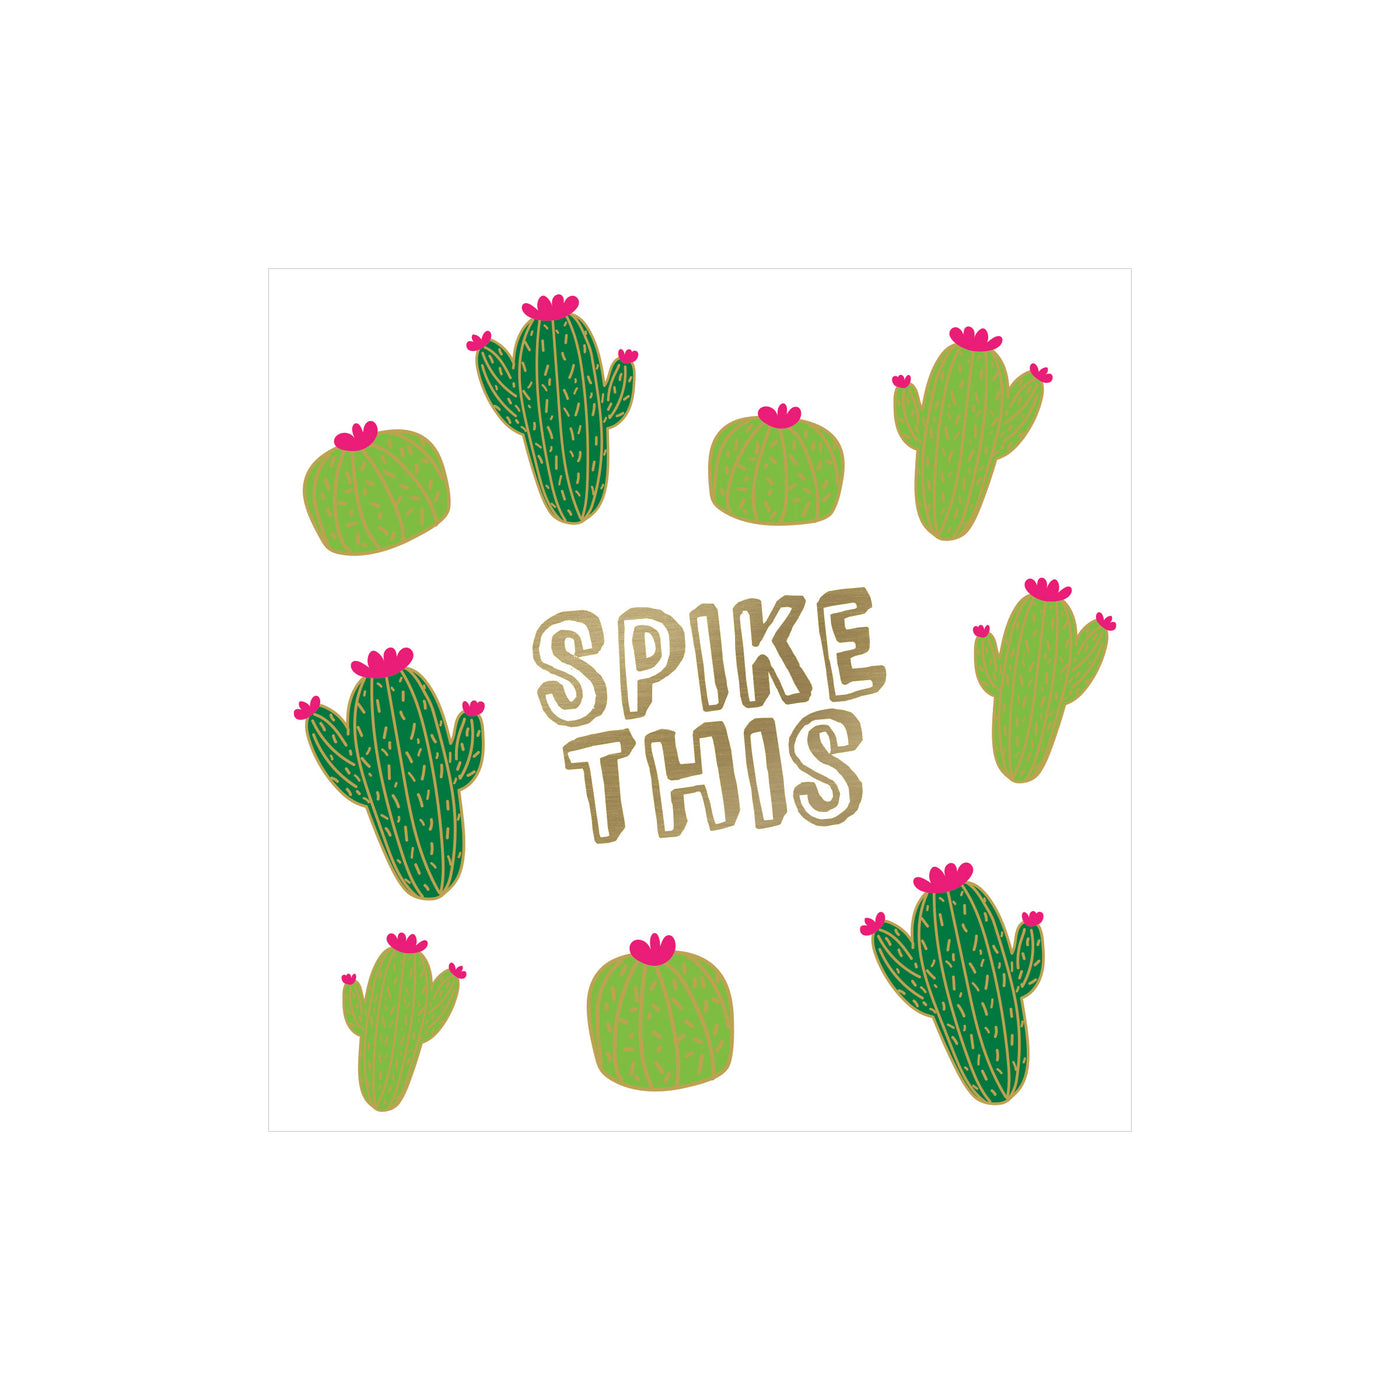 cactus theme party beverage napkin reads "SPIKE THIS"